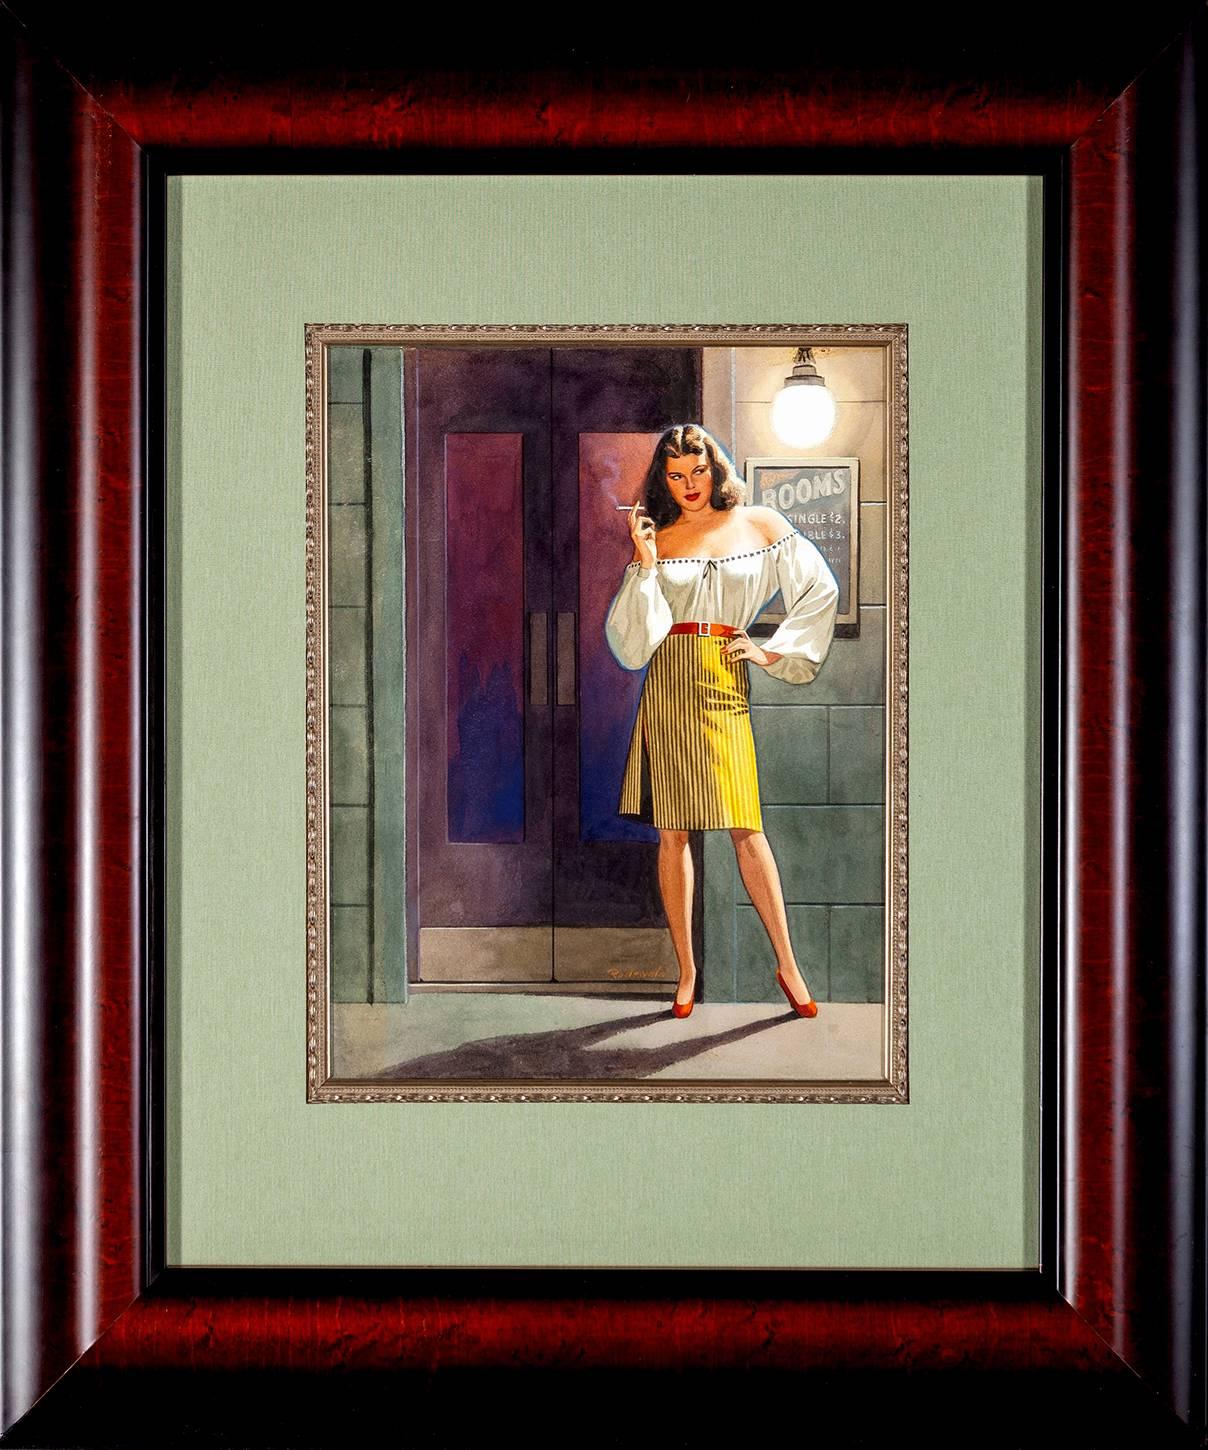 Buy My Love - American Realist Painting by Fred Rodewald